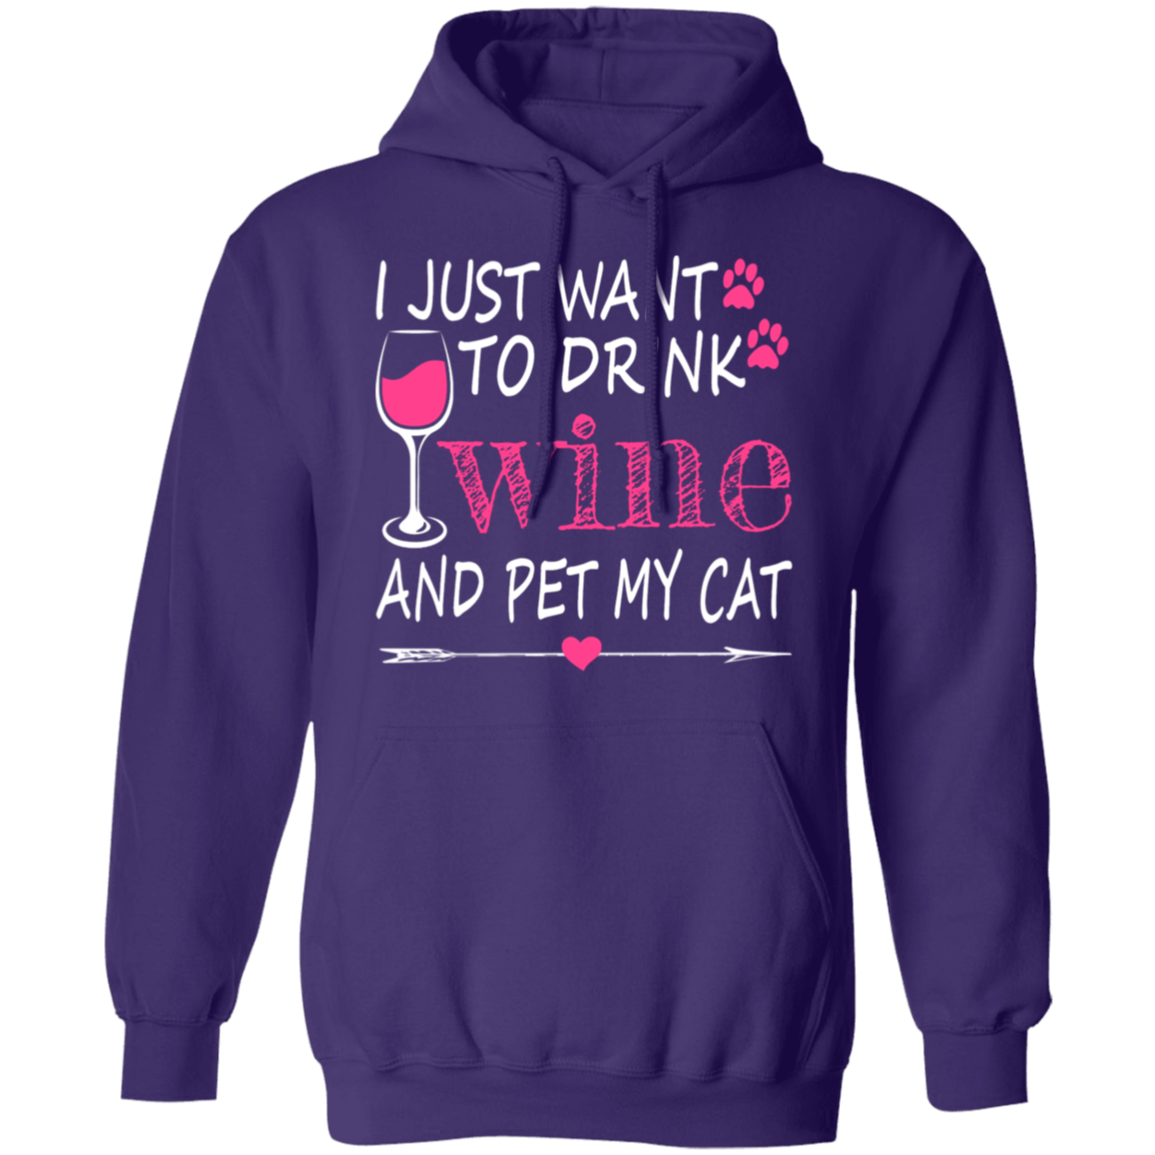 I Just Want to Drink Wine... Pullover Hoodie